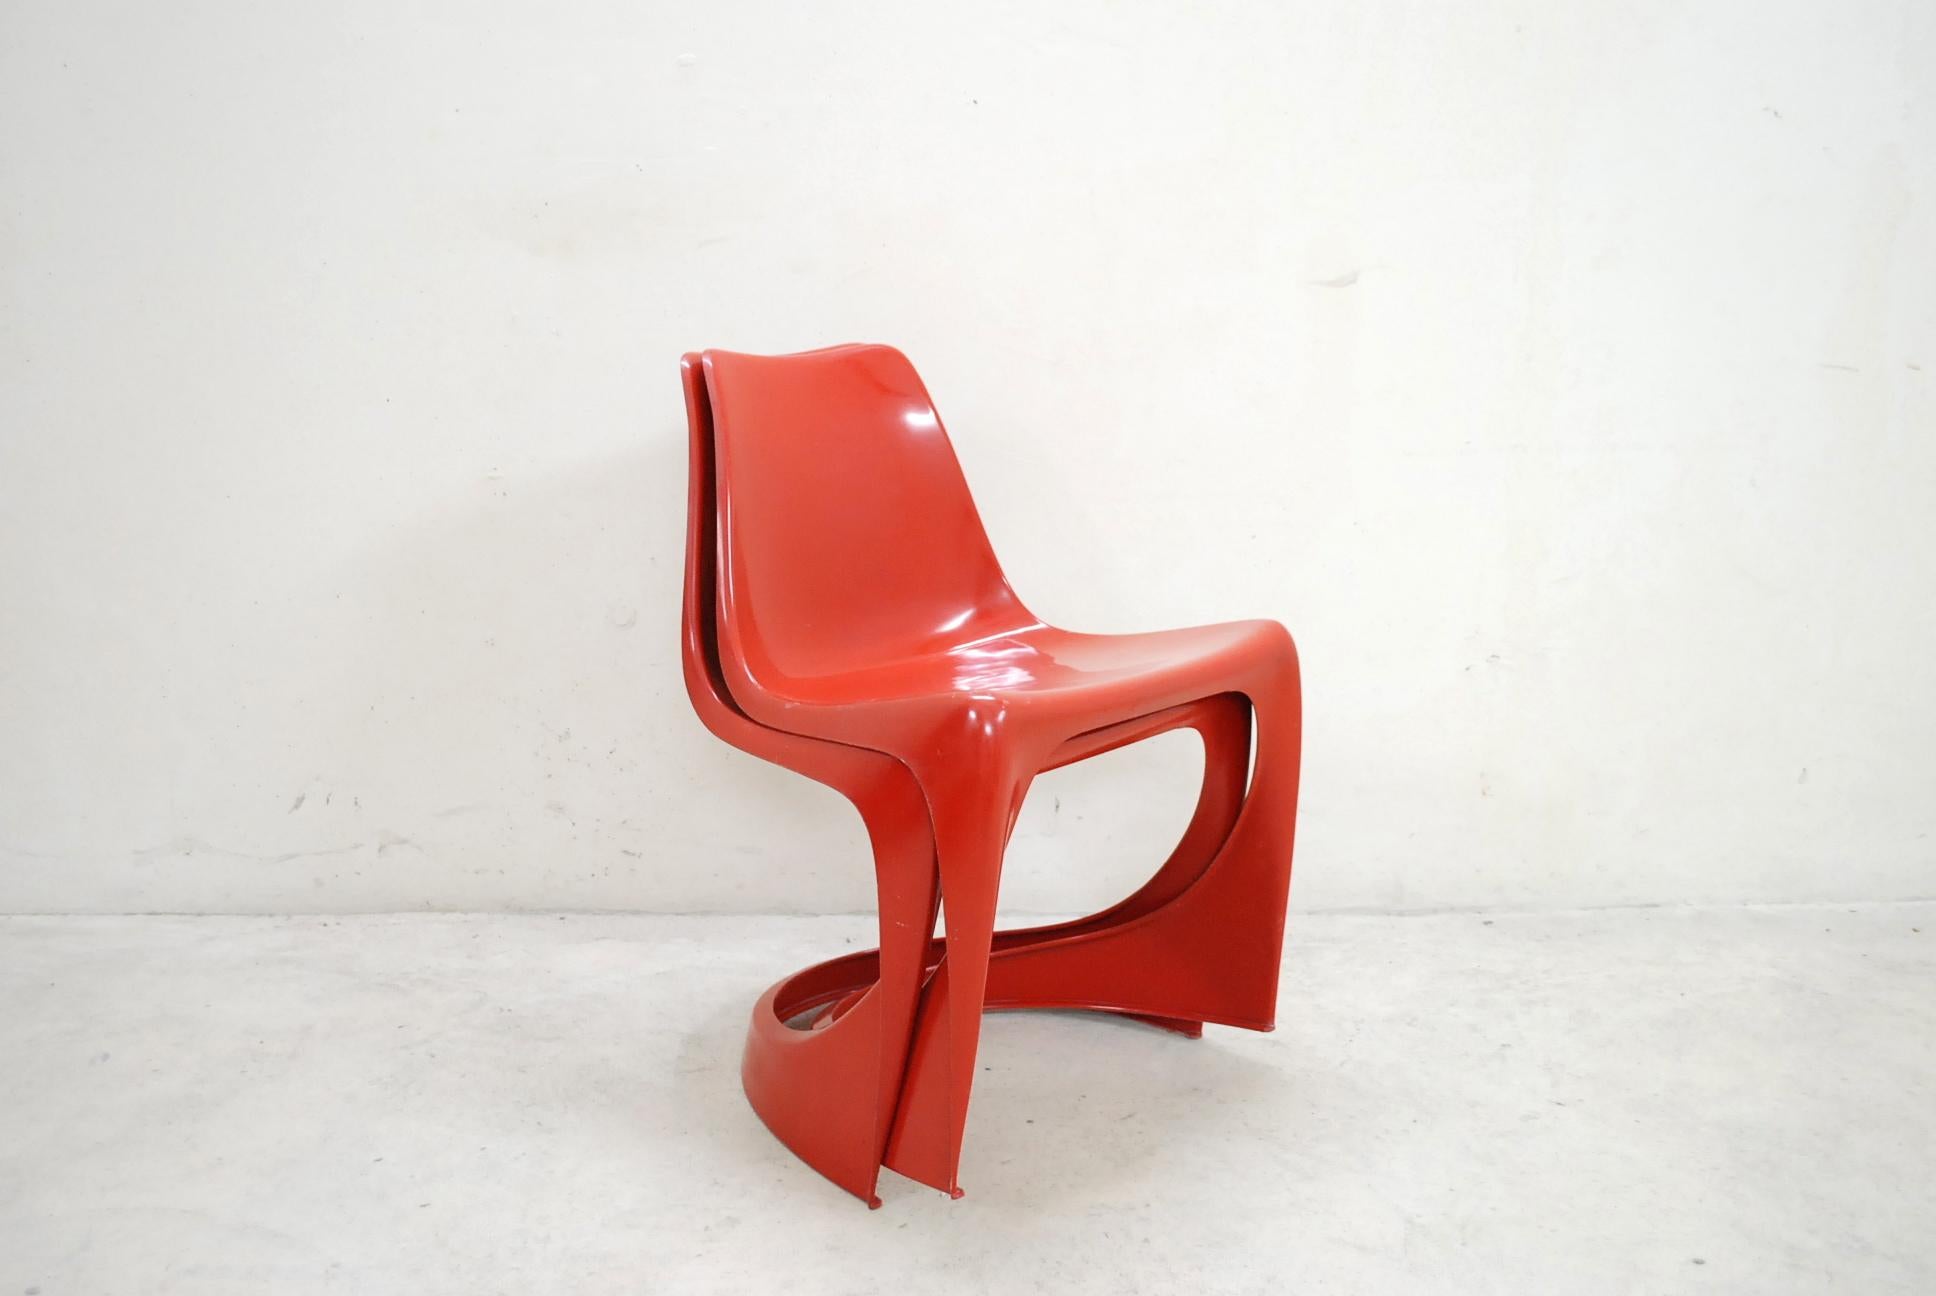 Steen Ostergaard model 290 red plastic stacking chairs manufactured by Cado, 1970.
Set of 2.
With some scratches and marks.